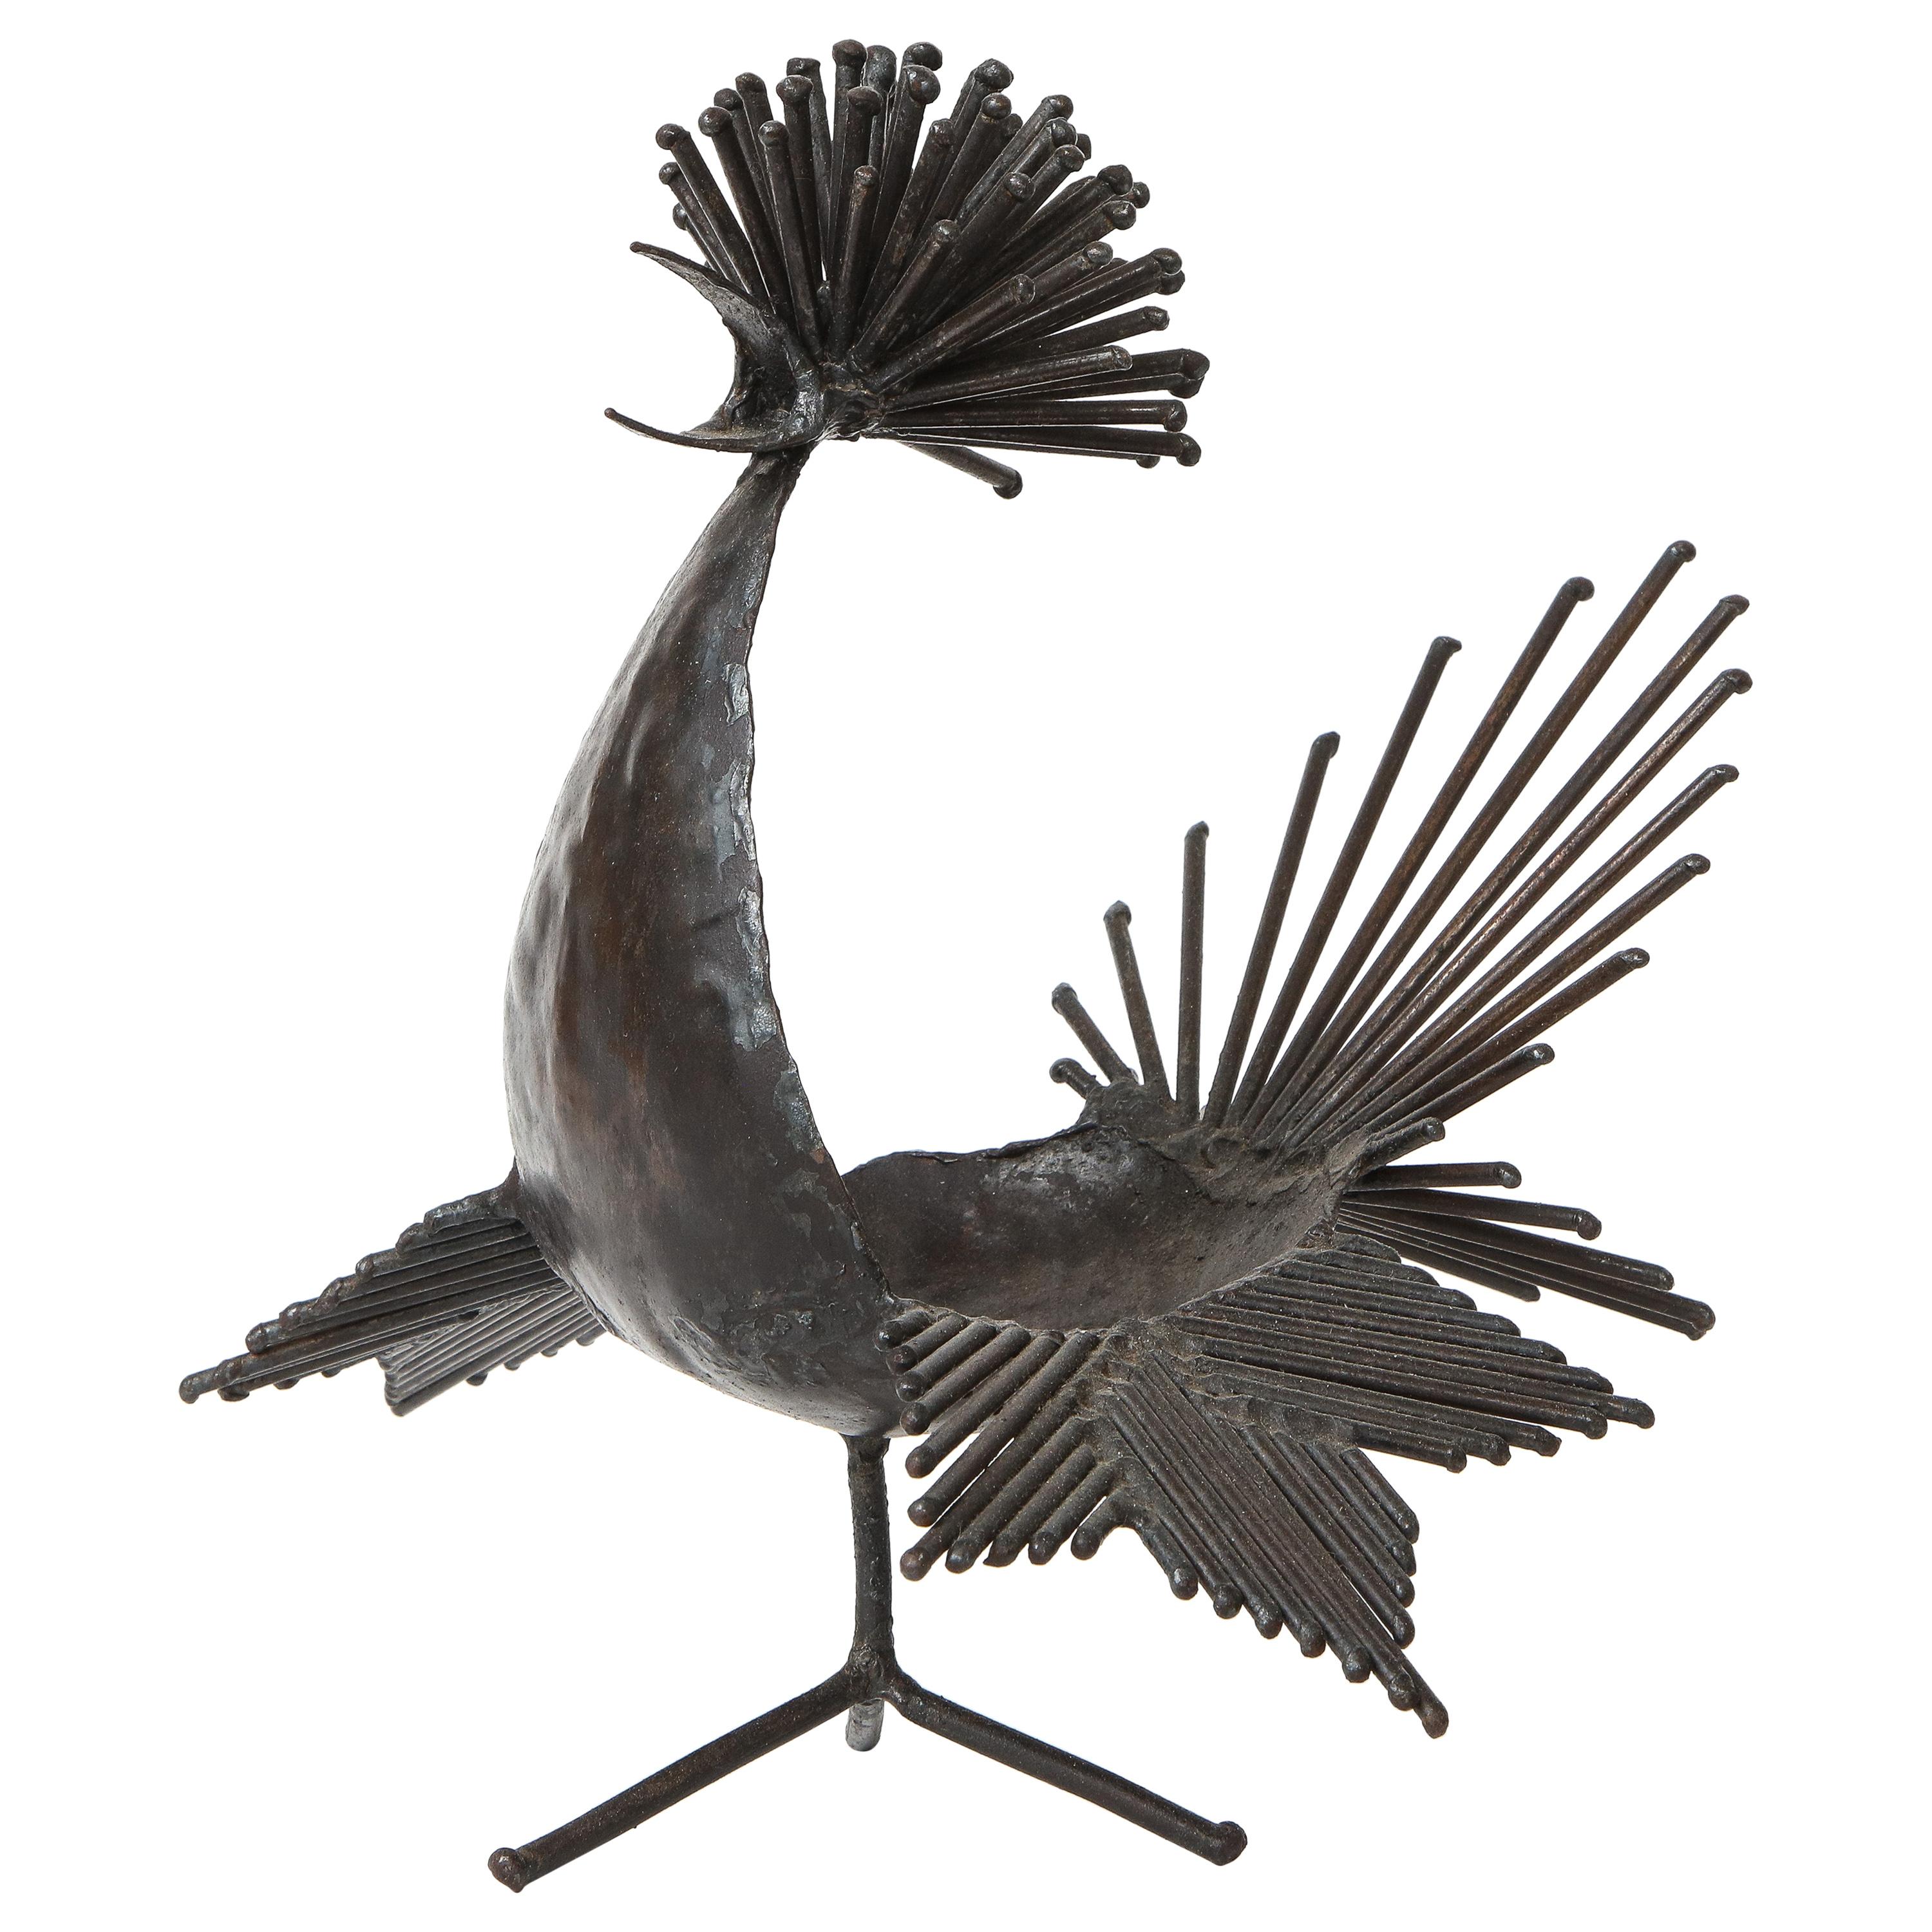 "Le Coq" Sculpture in Soldering Iron by Michel Anasse, France, 1965